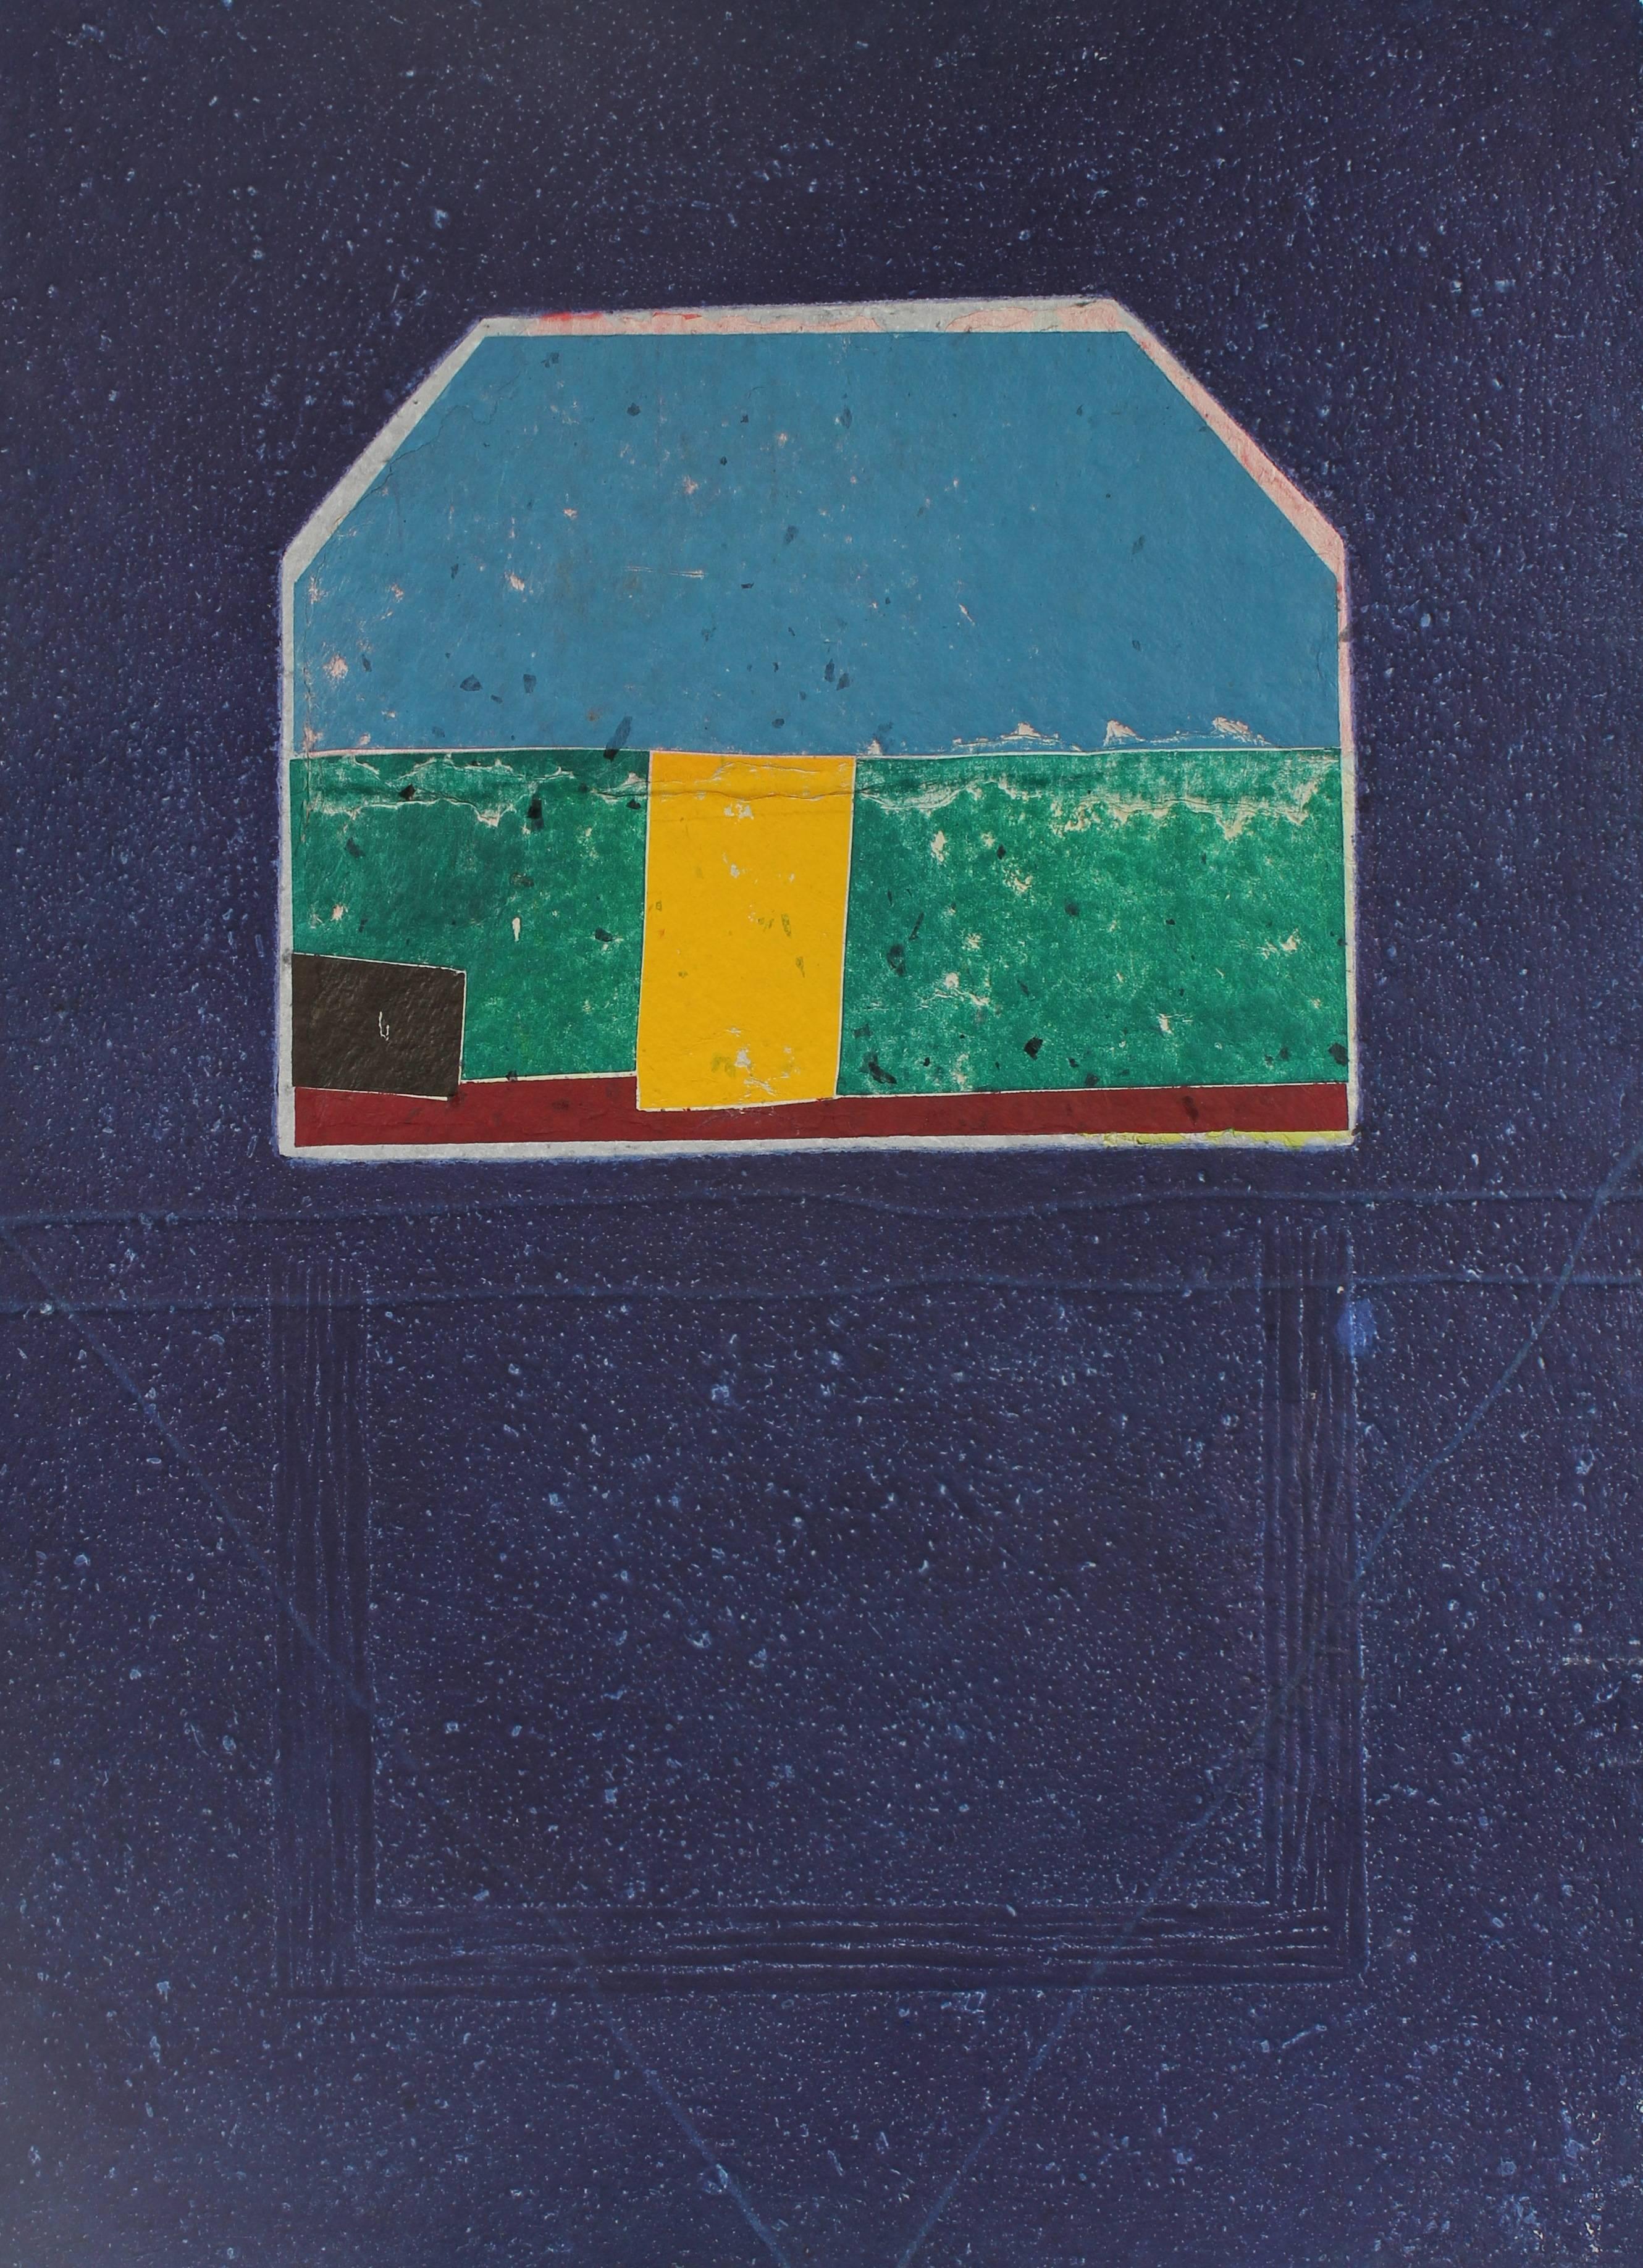 Gary Lee Shaffer Abstract Print - "House Grid" Large Collograph Print on Handmade Paper, 1984